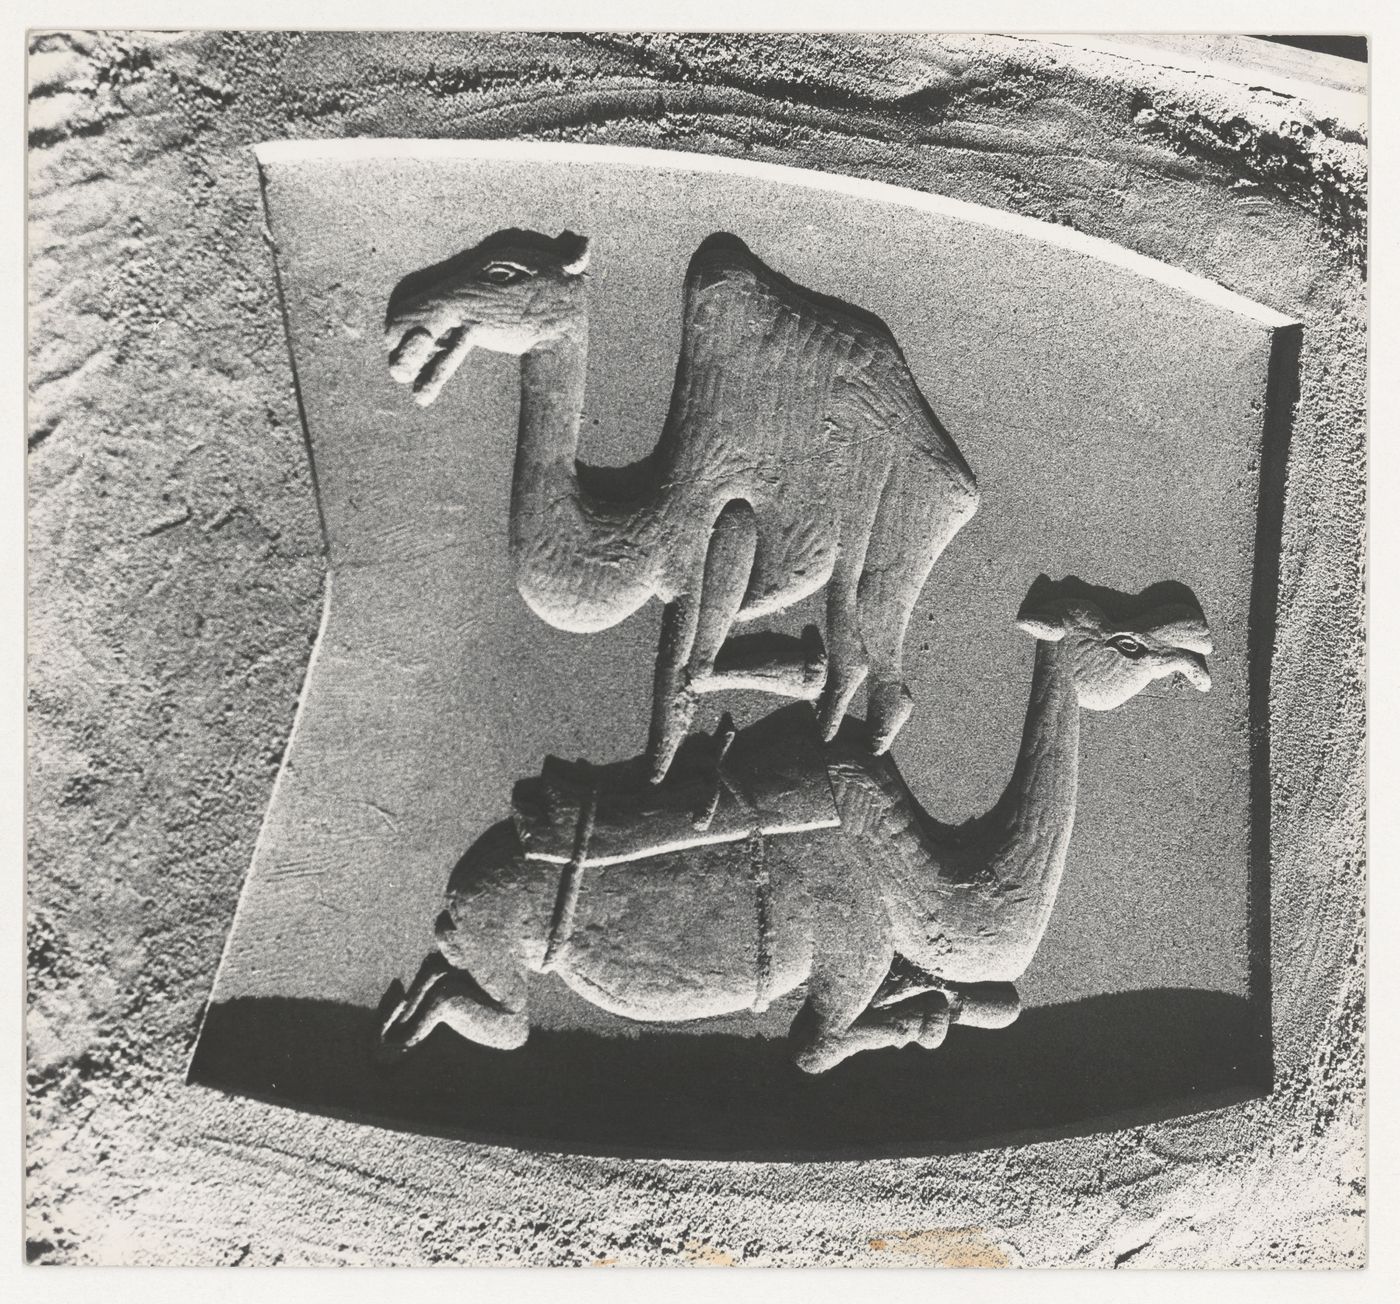 View of a bas-relief of the two camels sign by Le Corbusier, Chandigarh, India